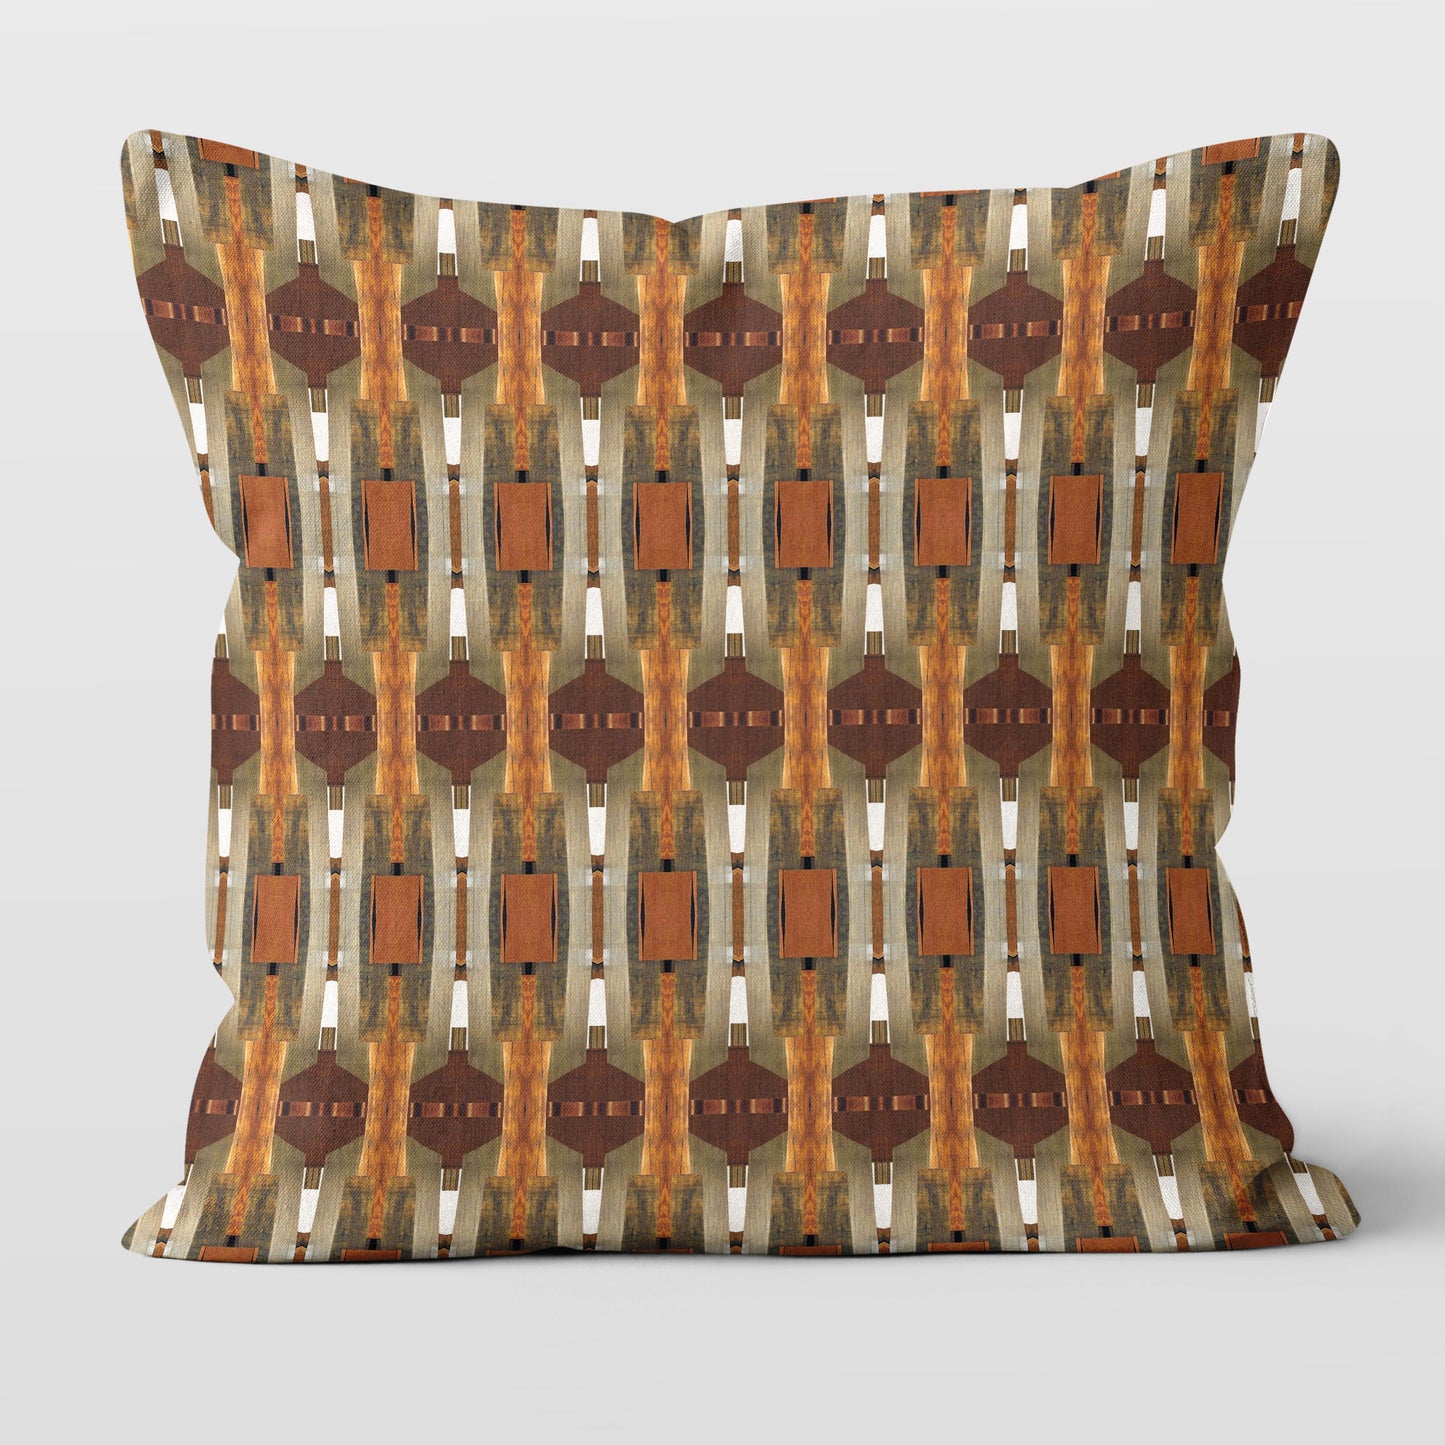 Throw pillow featuring collage pattern in wood and warm tones.